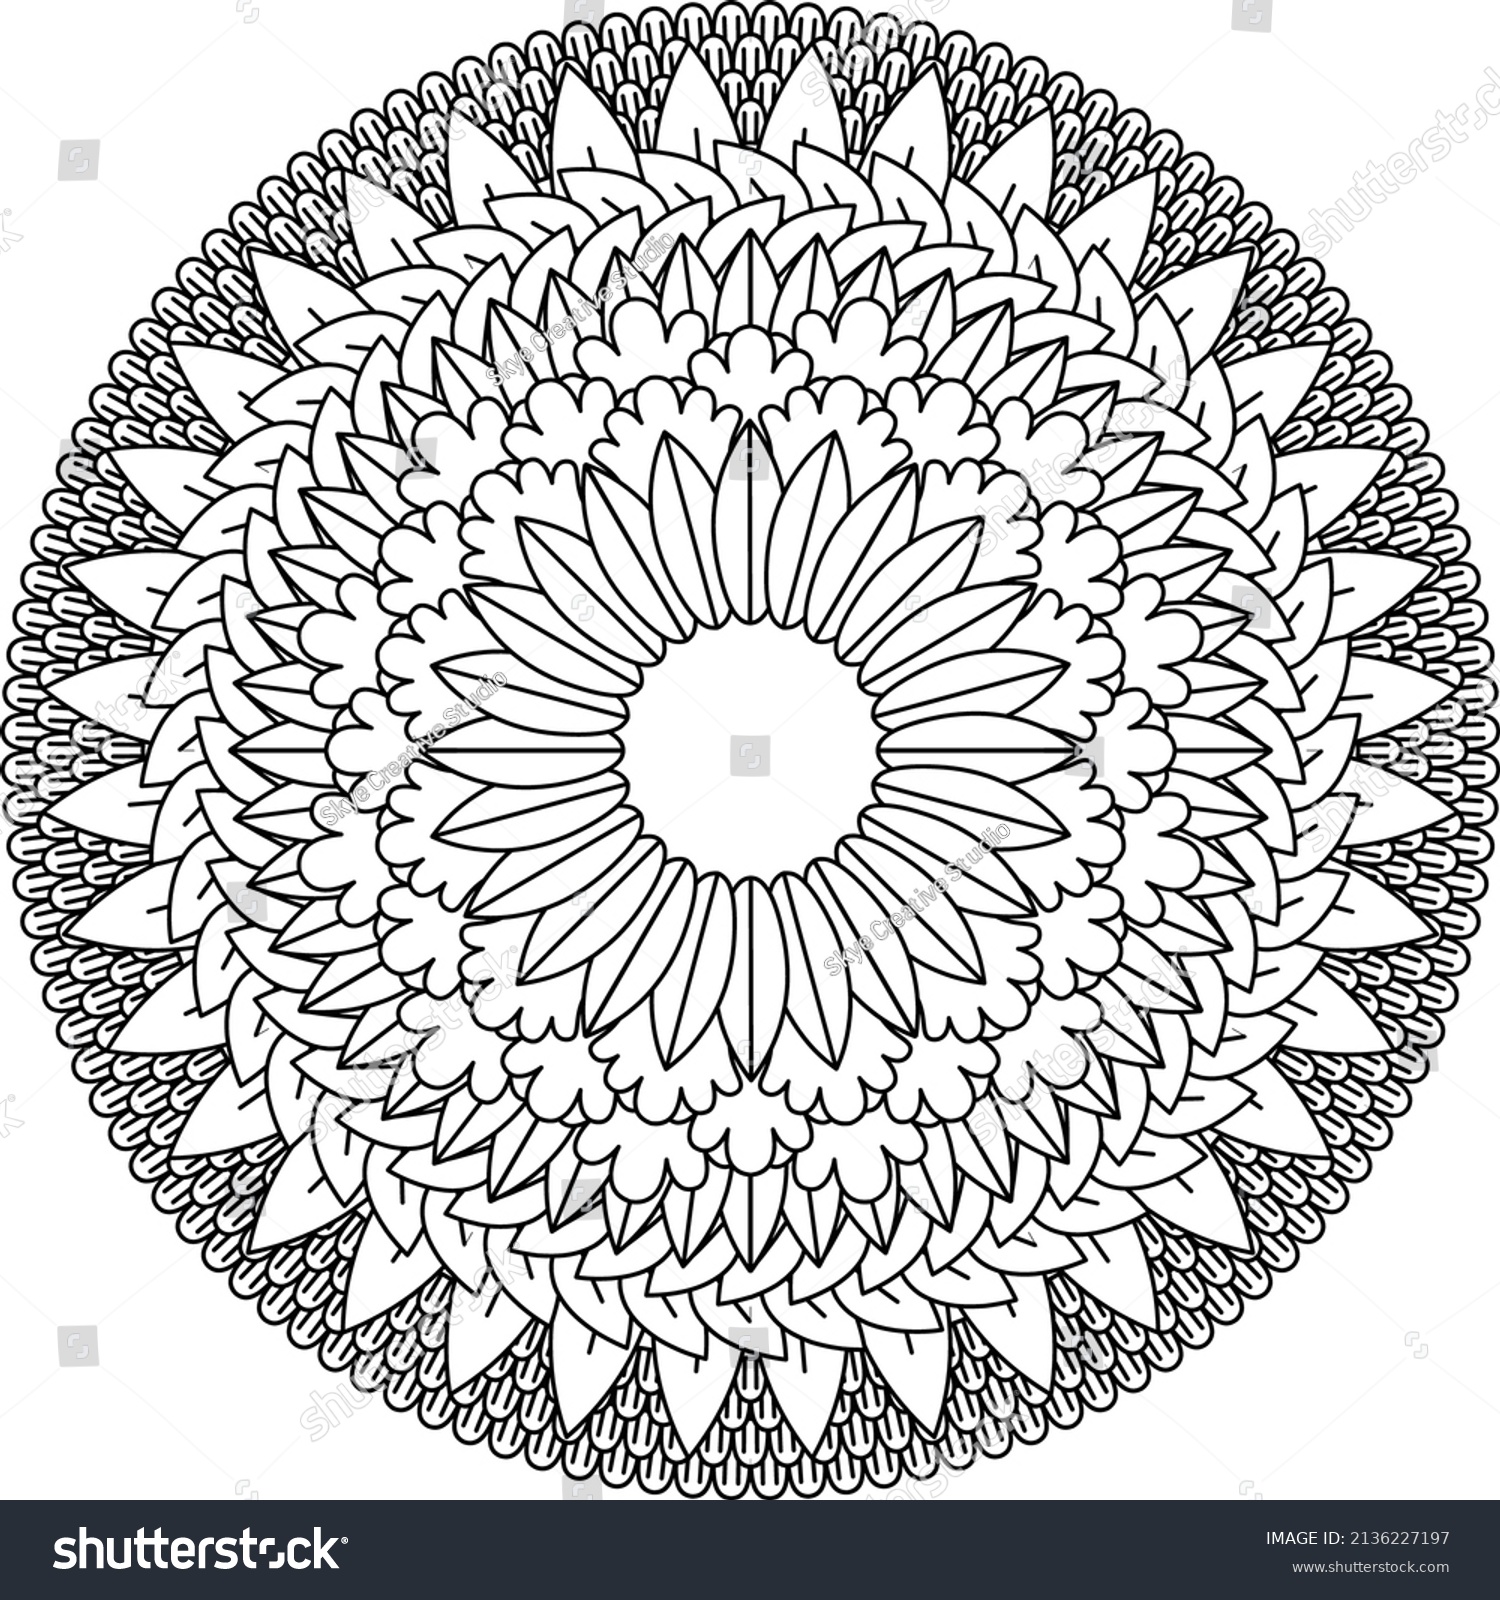 SVG of Simple mandala for relaxation. Flower mandala meditation coloring. Decorative ornament in ethnic oriental style, round shape and patterns for background and coloring book pages. svg